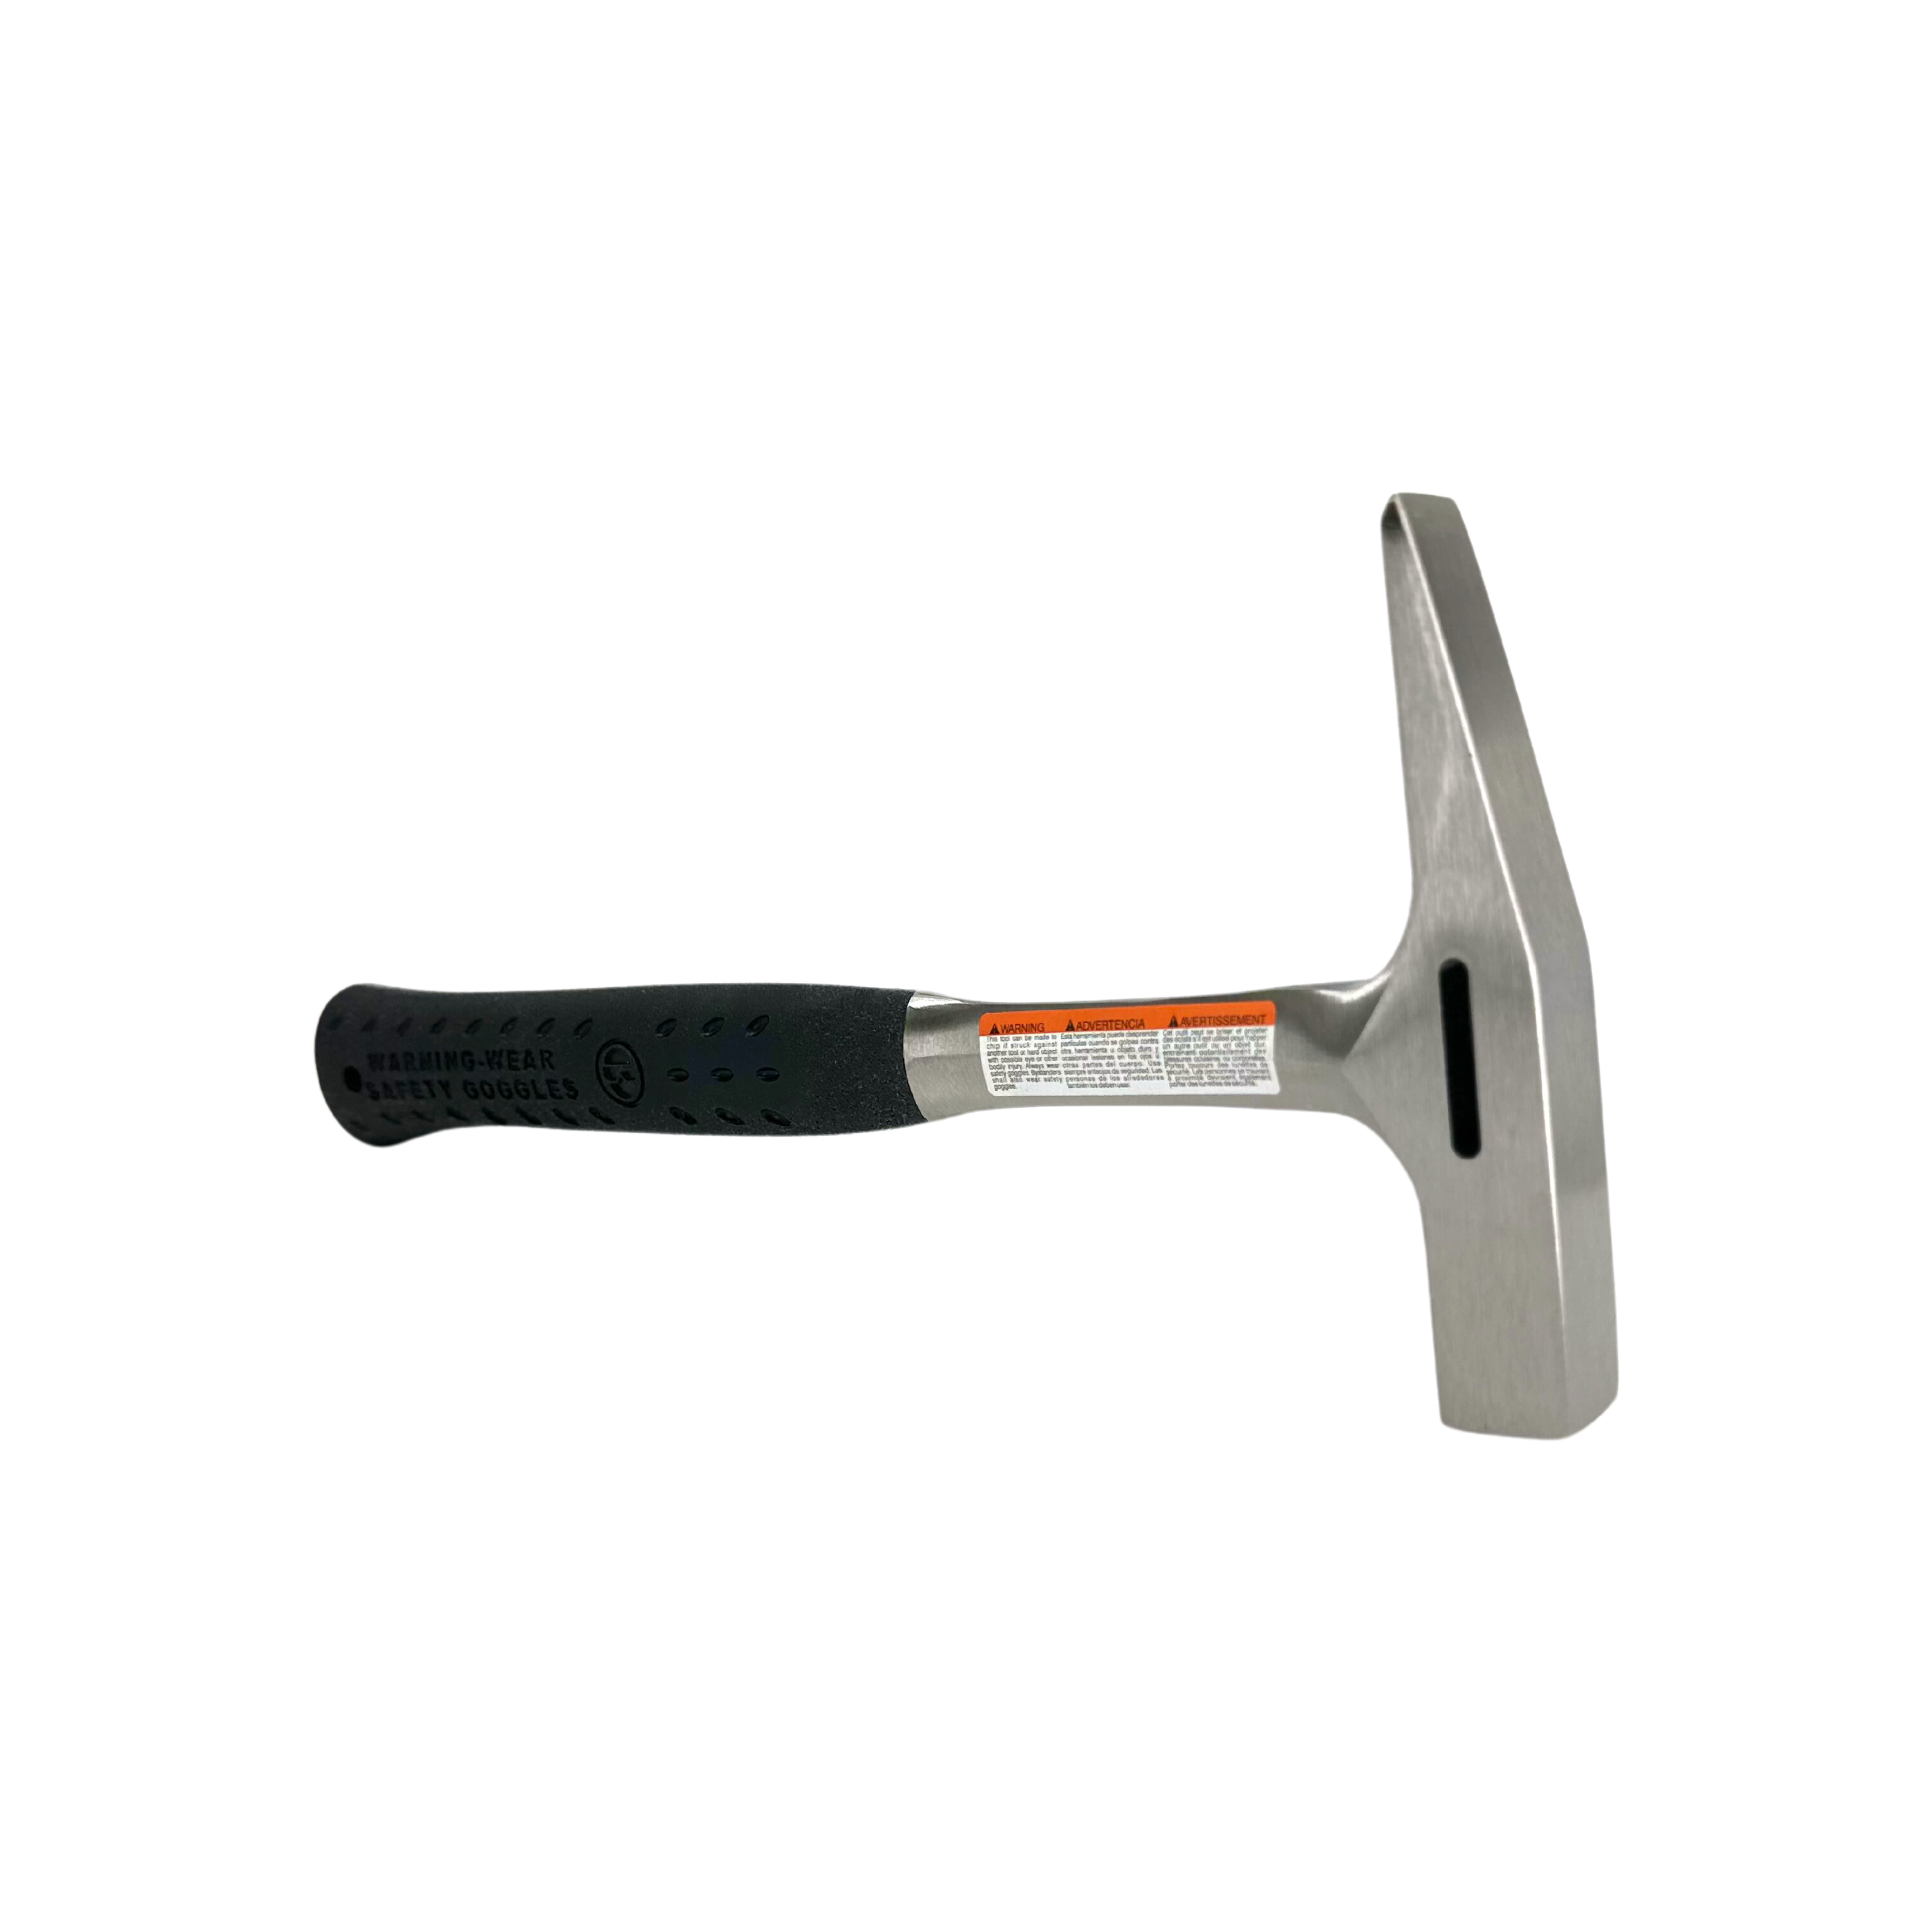 18-Ounce Sheet Metal Hammer with Cleat Slot [MWT-18] - Midwest Tool